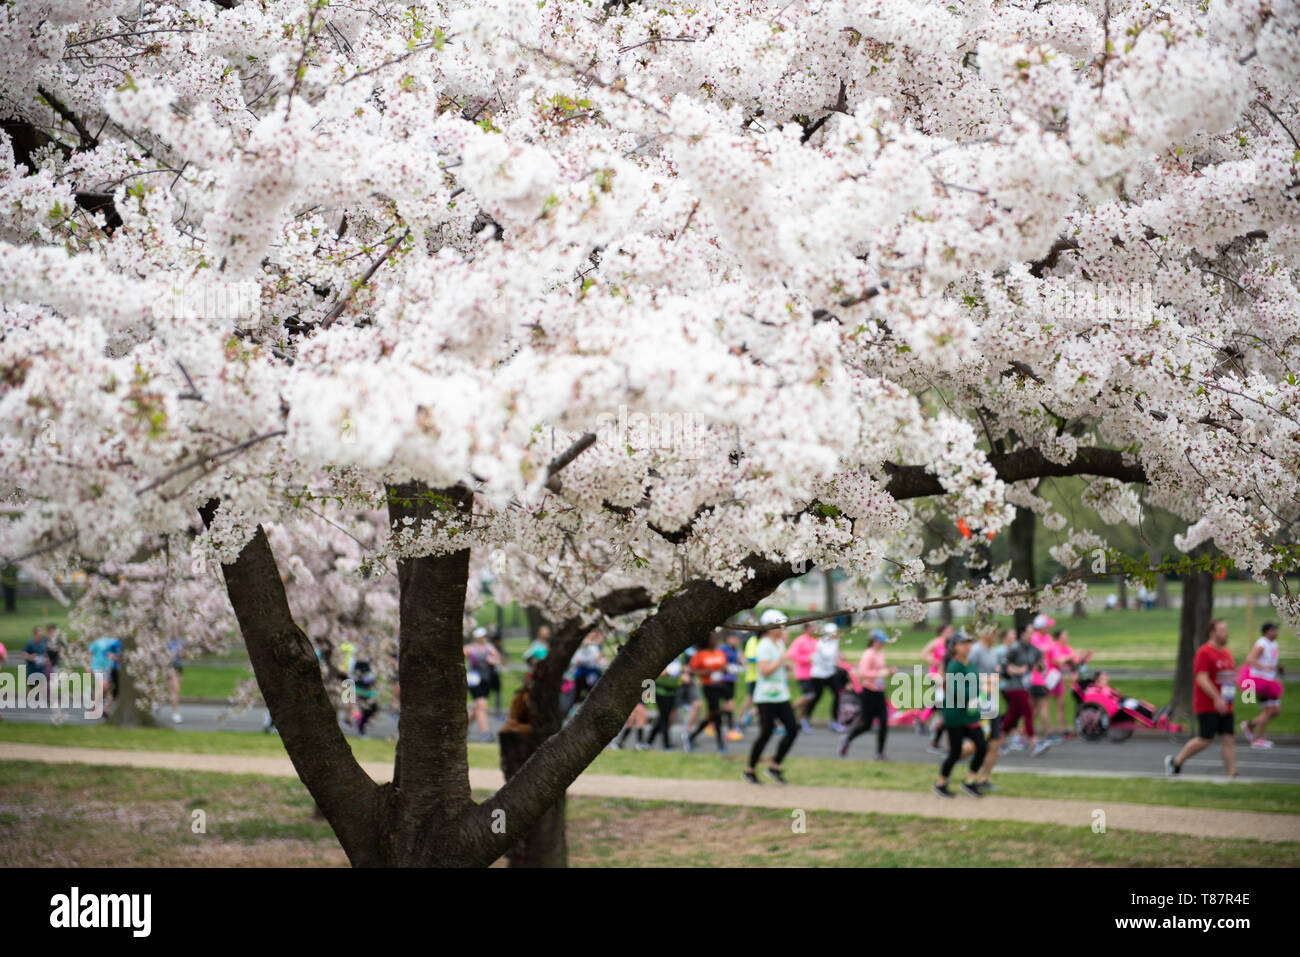 WASHINGTON, DC - Runners in the Cherry Blossom 10 Mile Race run past Washington DC's famous cherry blossoms in full bloom. Each spring, the blooming of thousands of Japanese cherry blossoms around Washington DC's Tidal Basin and National Mall bring throngs of tourists to the city. Stock Photo